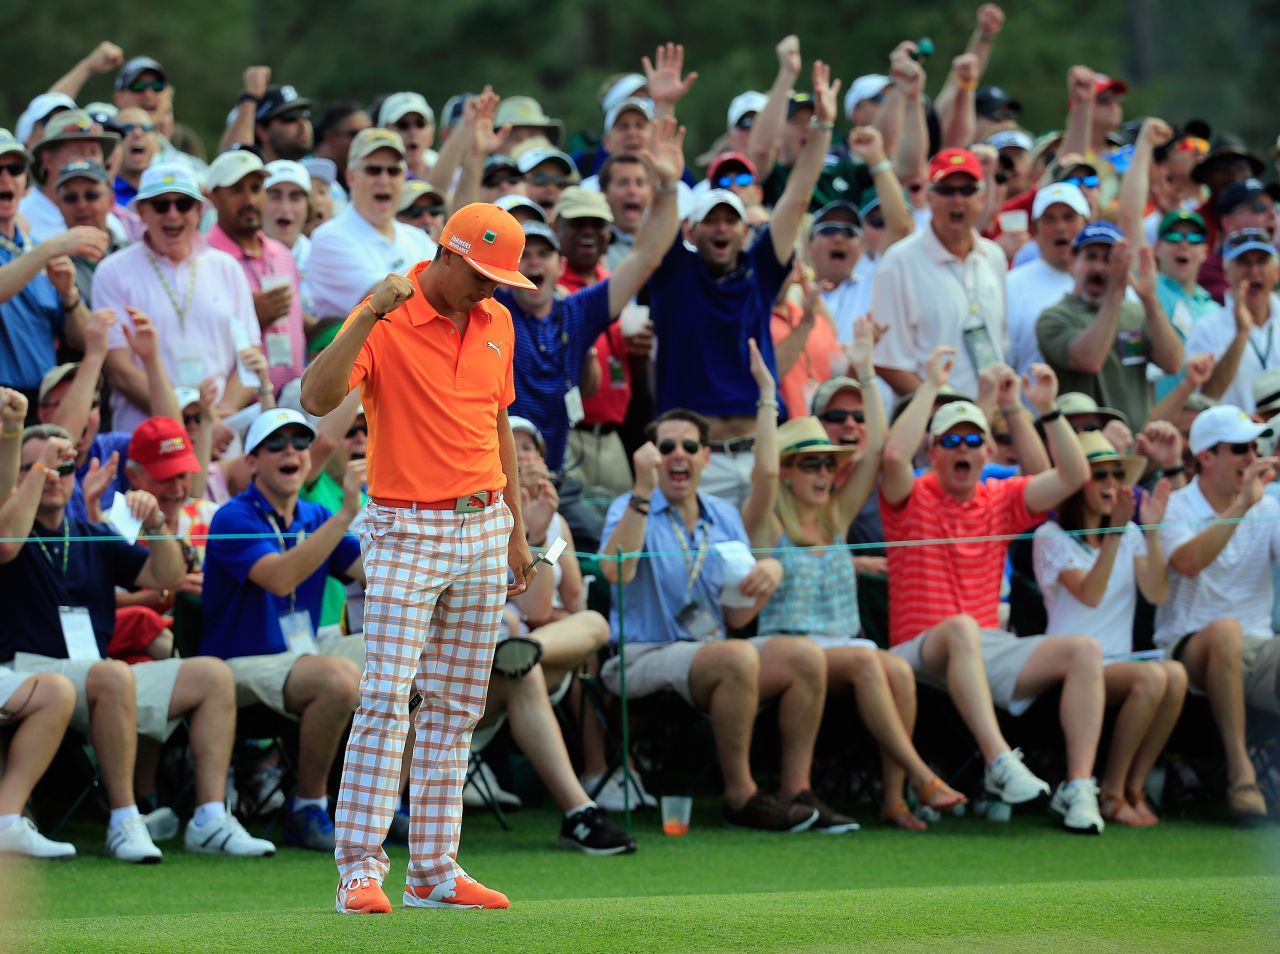 Resplendent in orange, Rickie Fowler milks the applause of the crowd after holing a monster putt on the ninth in the final round.